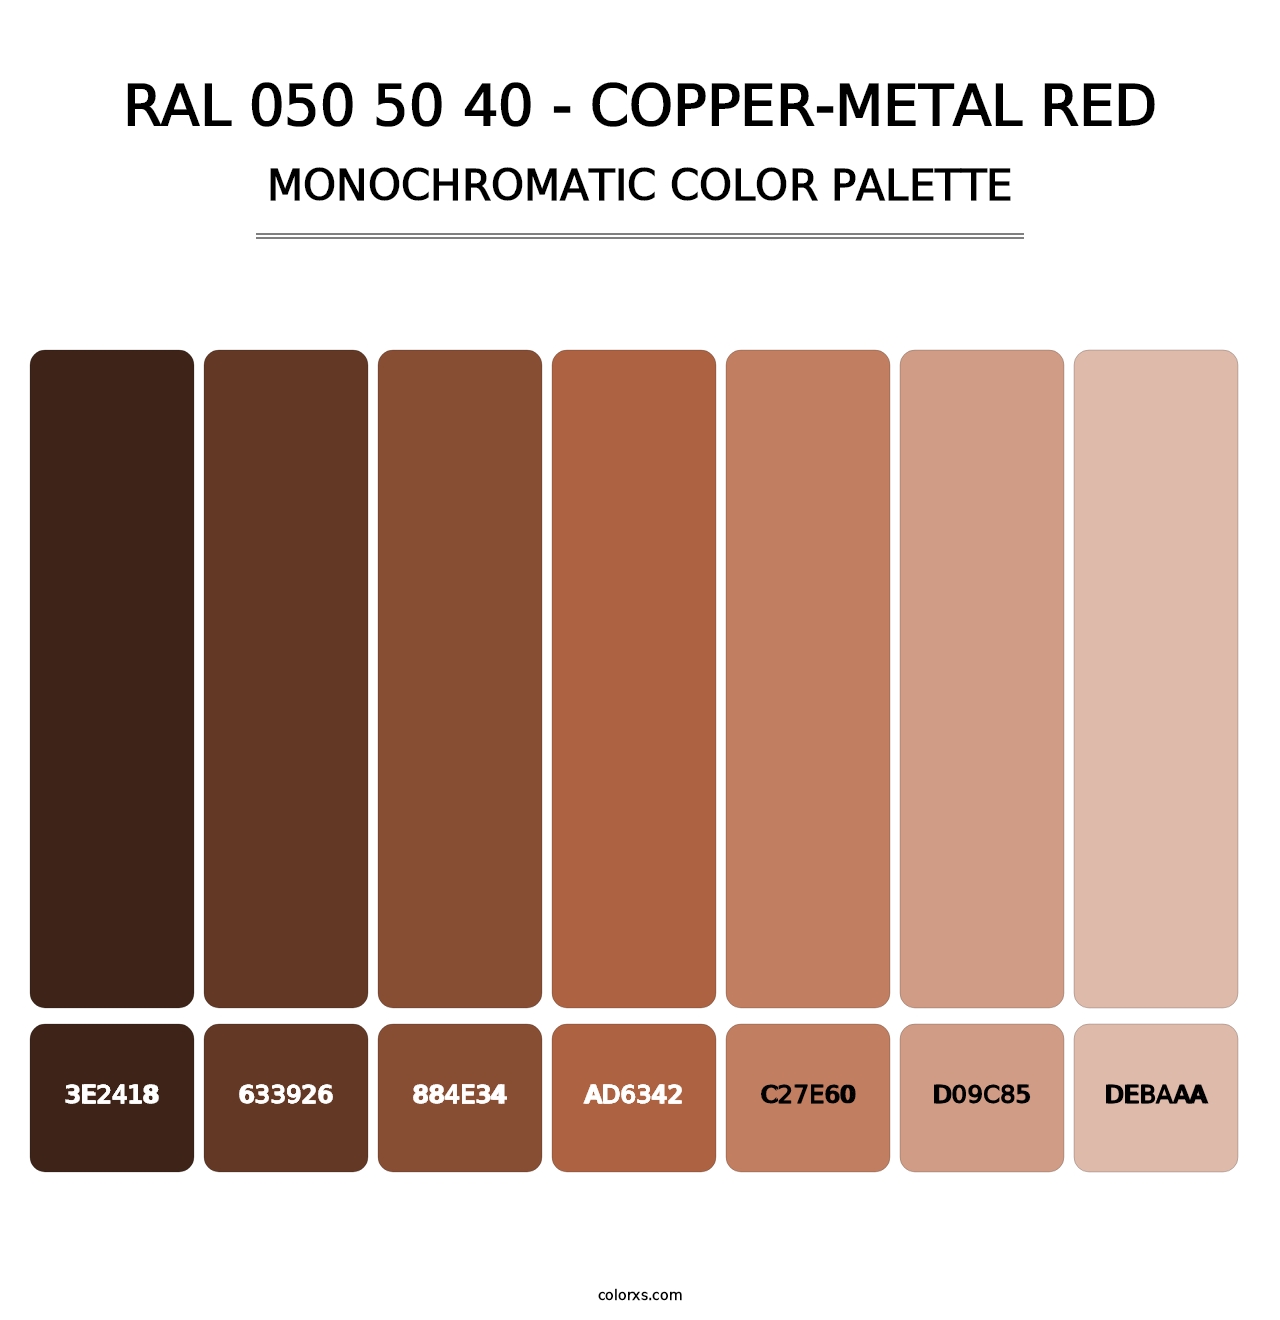 RAL 050 50 40 - Copper-Metal Red - Monochromatic Color Palette